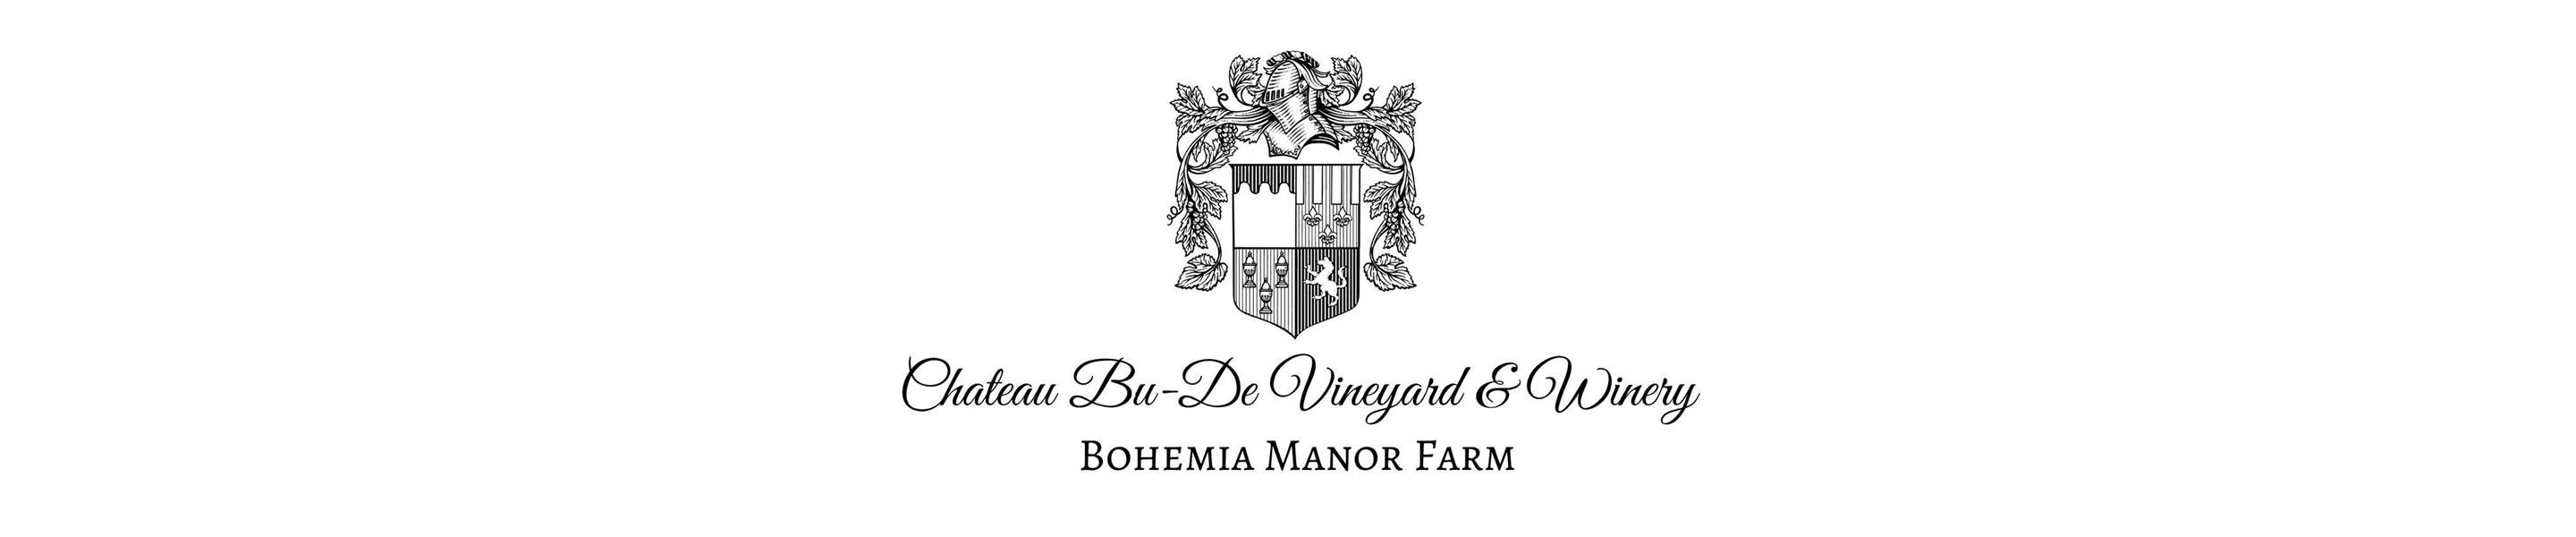 At Chateau Bu-De Vineyard & Winery, Bohemia Manor Farm™, we strive to produce the finest Maryland wines, while staying true to the terrain & sustainable process of winemaking. The passionate & talented winemaker, Jacques van der Vyver, produces the highest quality wines using old world and new world techniques in a state of the art facility. Finding innovative methods to maintain the natural and pure form of the grapes enables Chateau Bu-De to make the finest Maryland Wines.